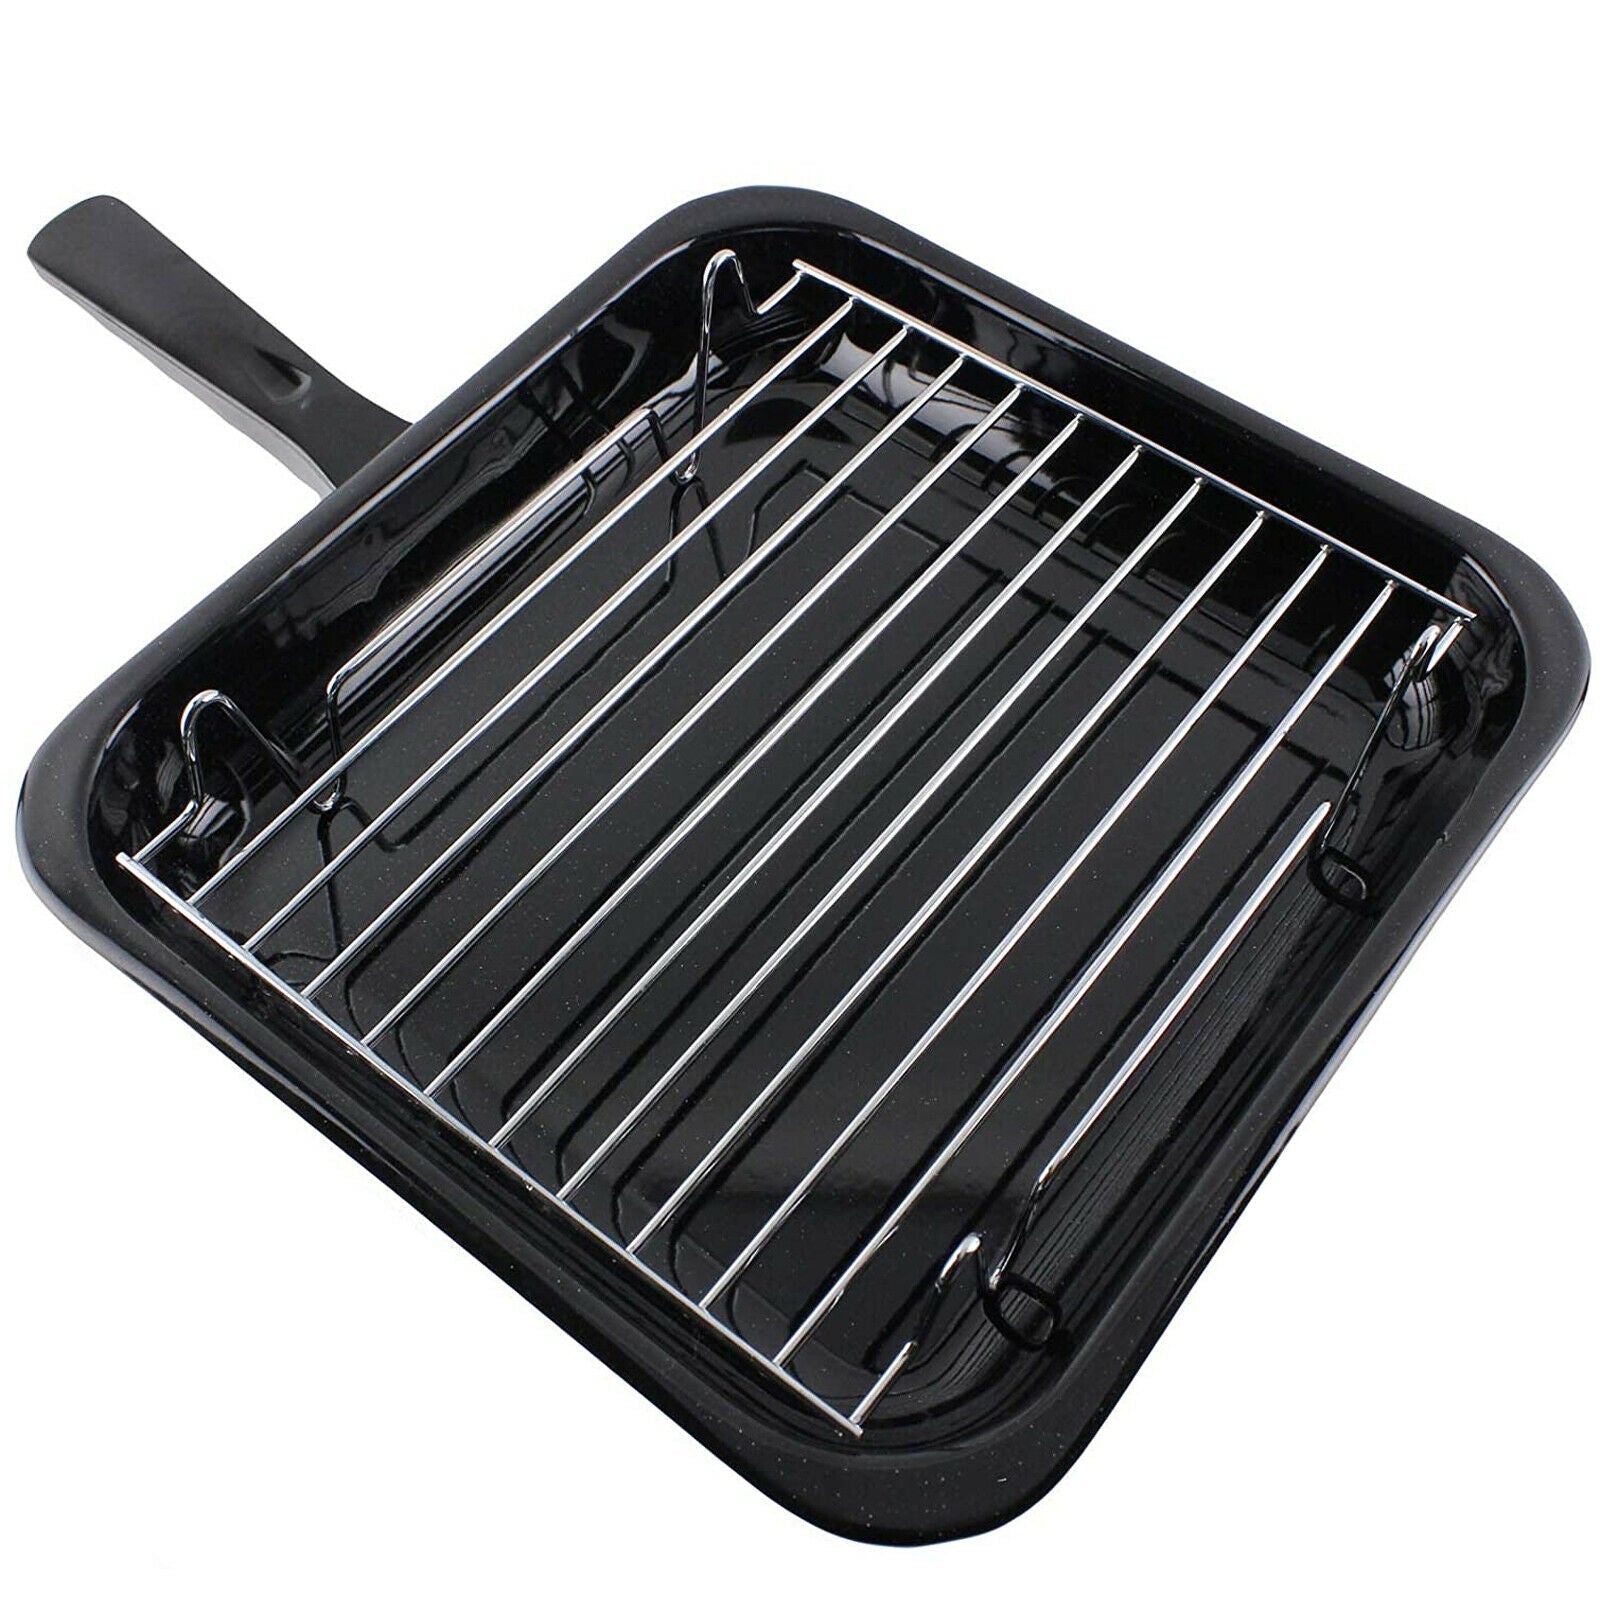 Small black square oven grill pan, rack and detachable handle - universal model